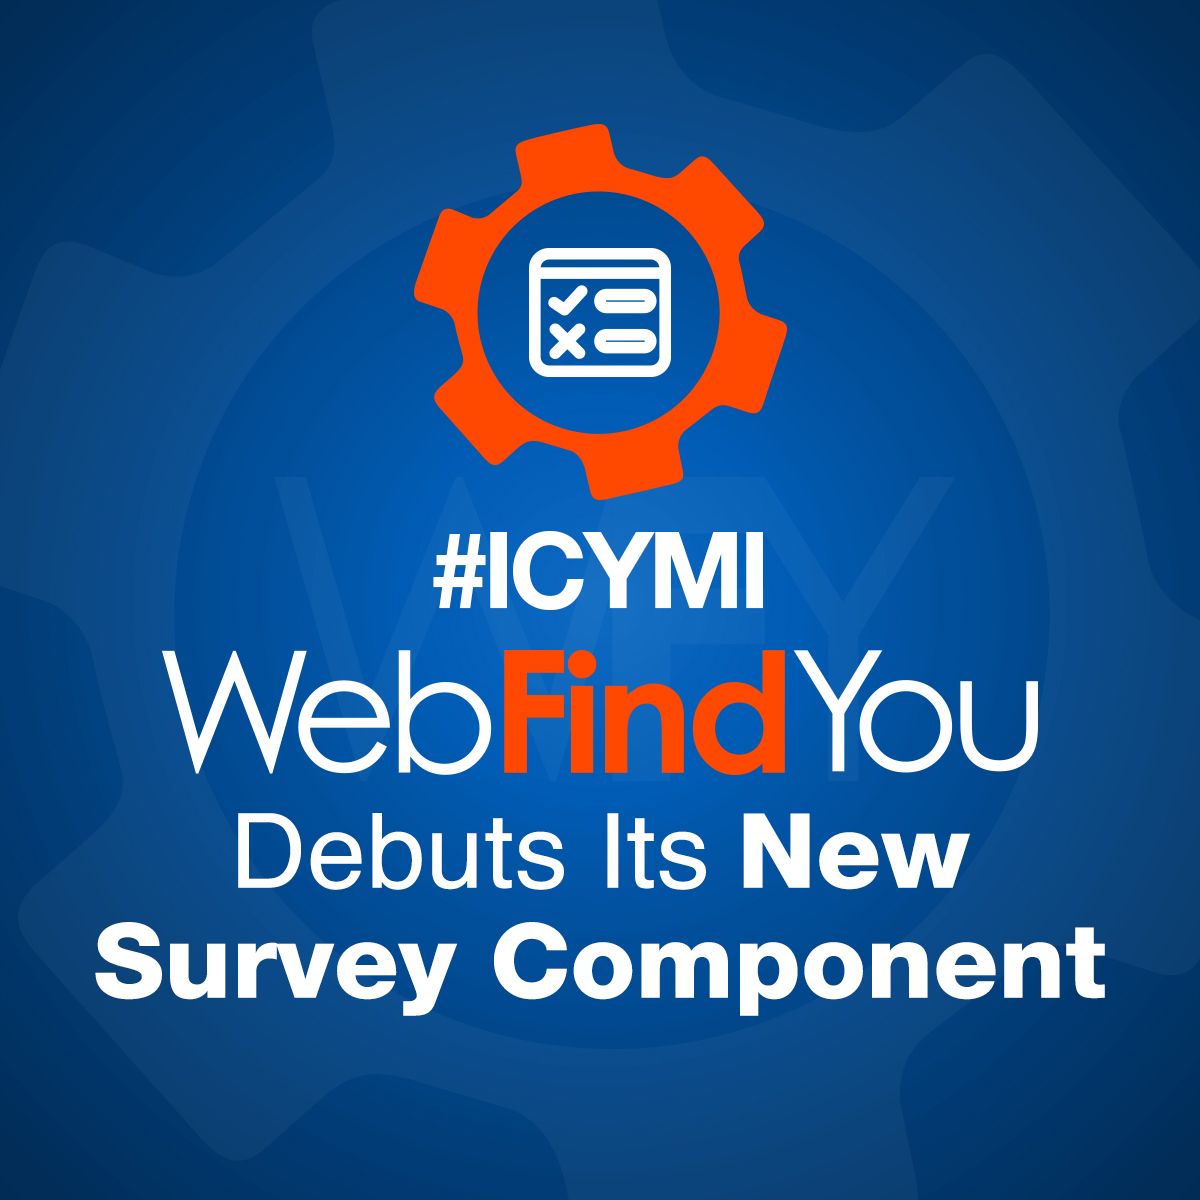 #ICYMI WebFindYou Debuts Its New Survey Component